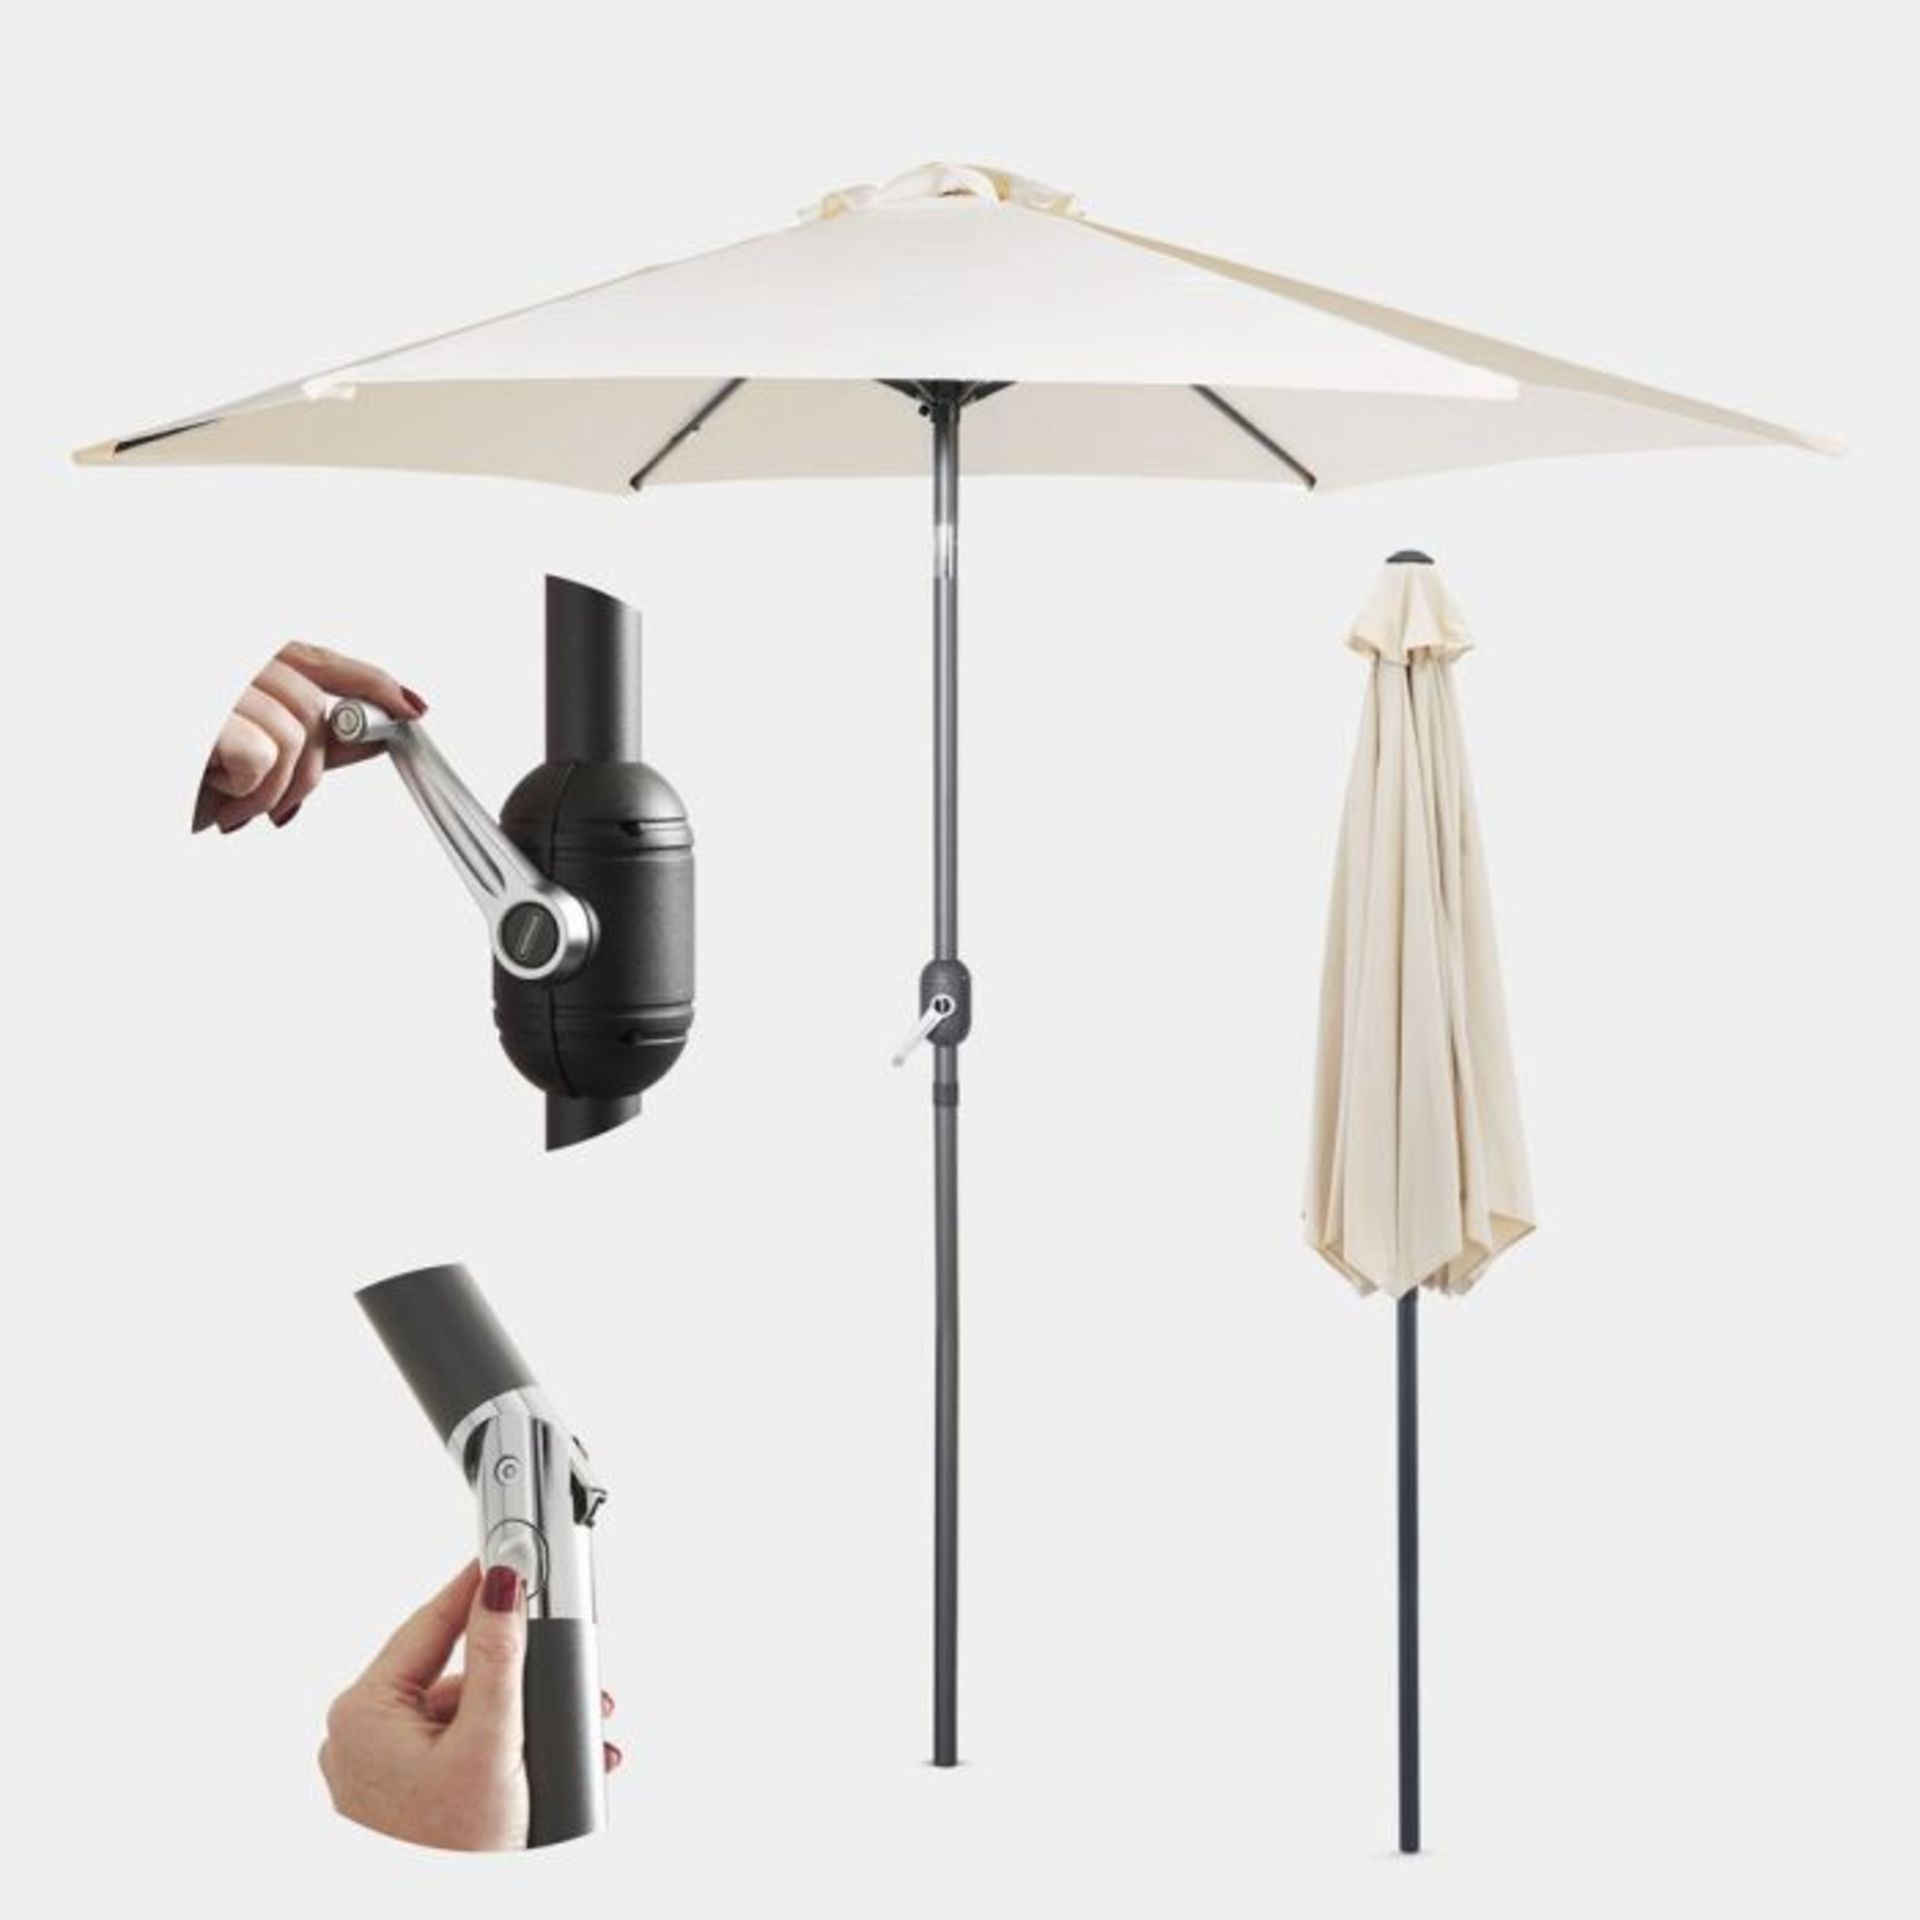 4x NEW & BOXED Ivory Cream 2.7m Steel Garden Parasol. RRP £59.99. (062.1). As much as everyone loves